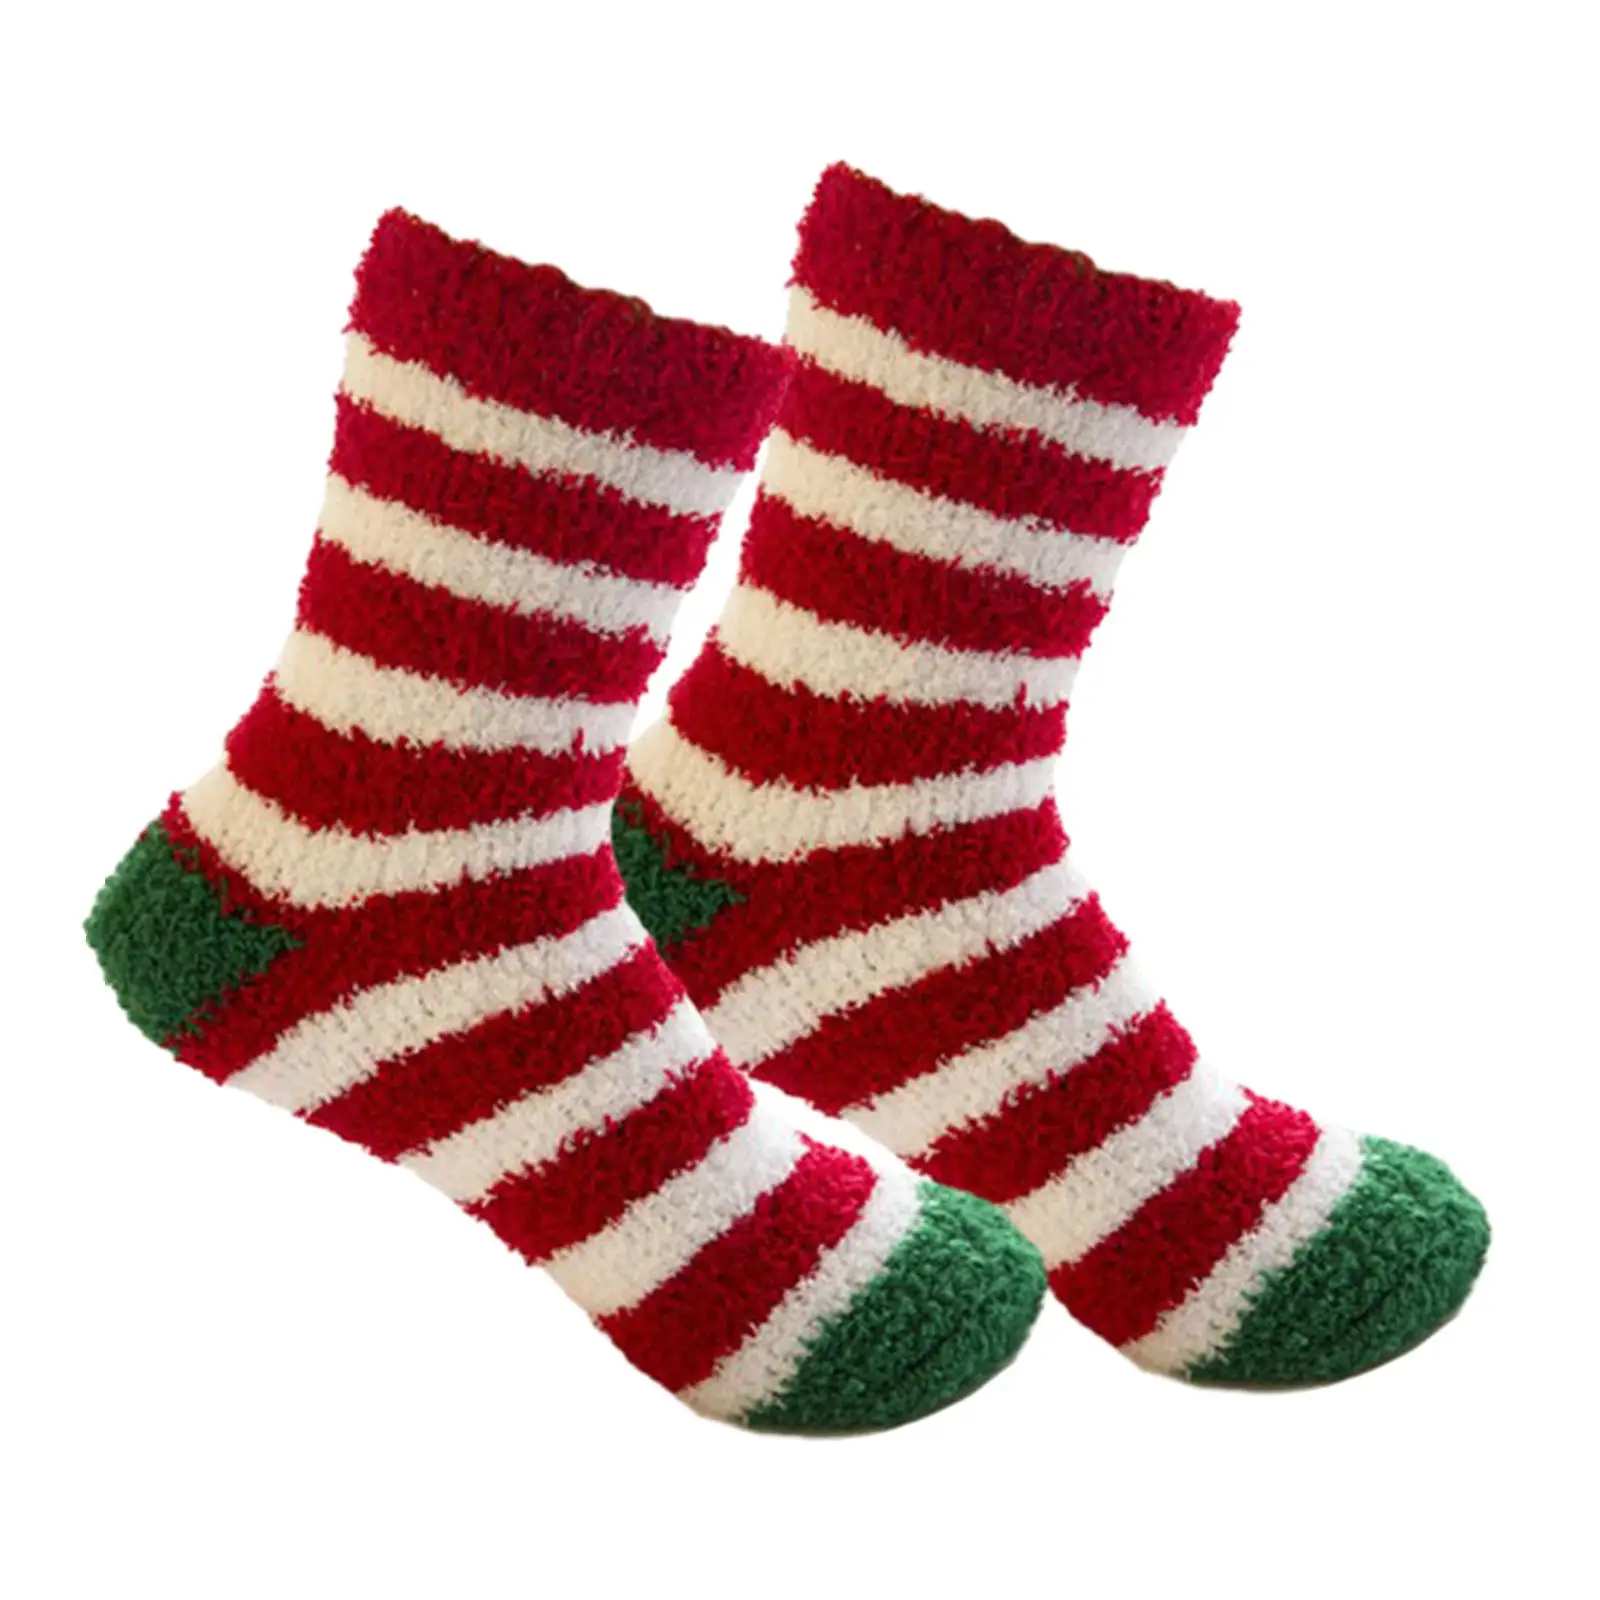 Christmas Fuzzy Socks for Women Girls Comfortable Thermal Cute Sleeping Socks for Party House Festive Bed Floor Home wearing